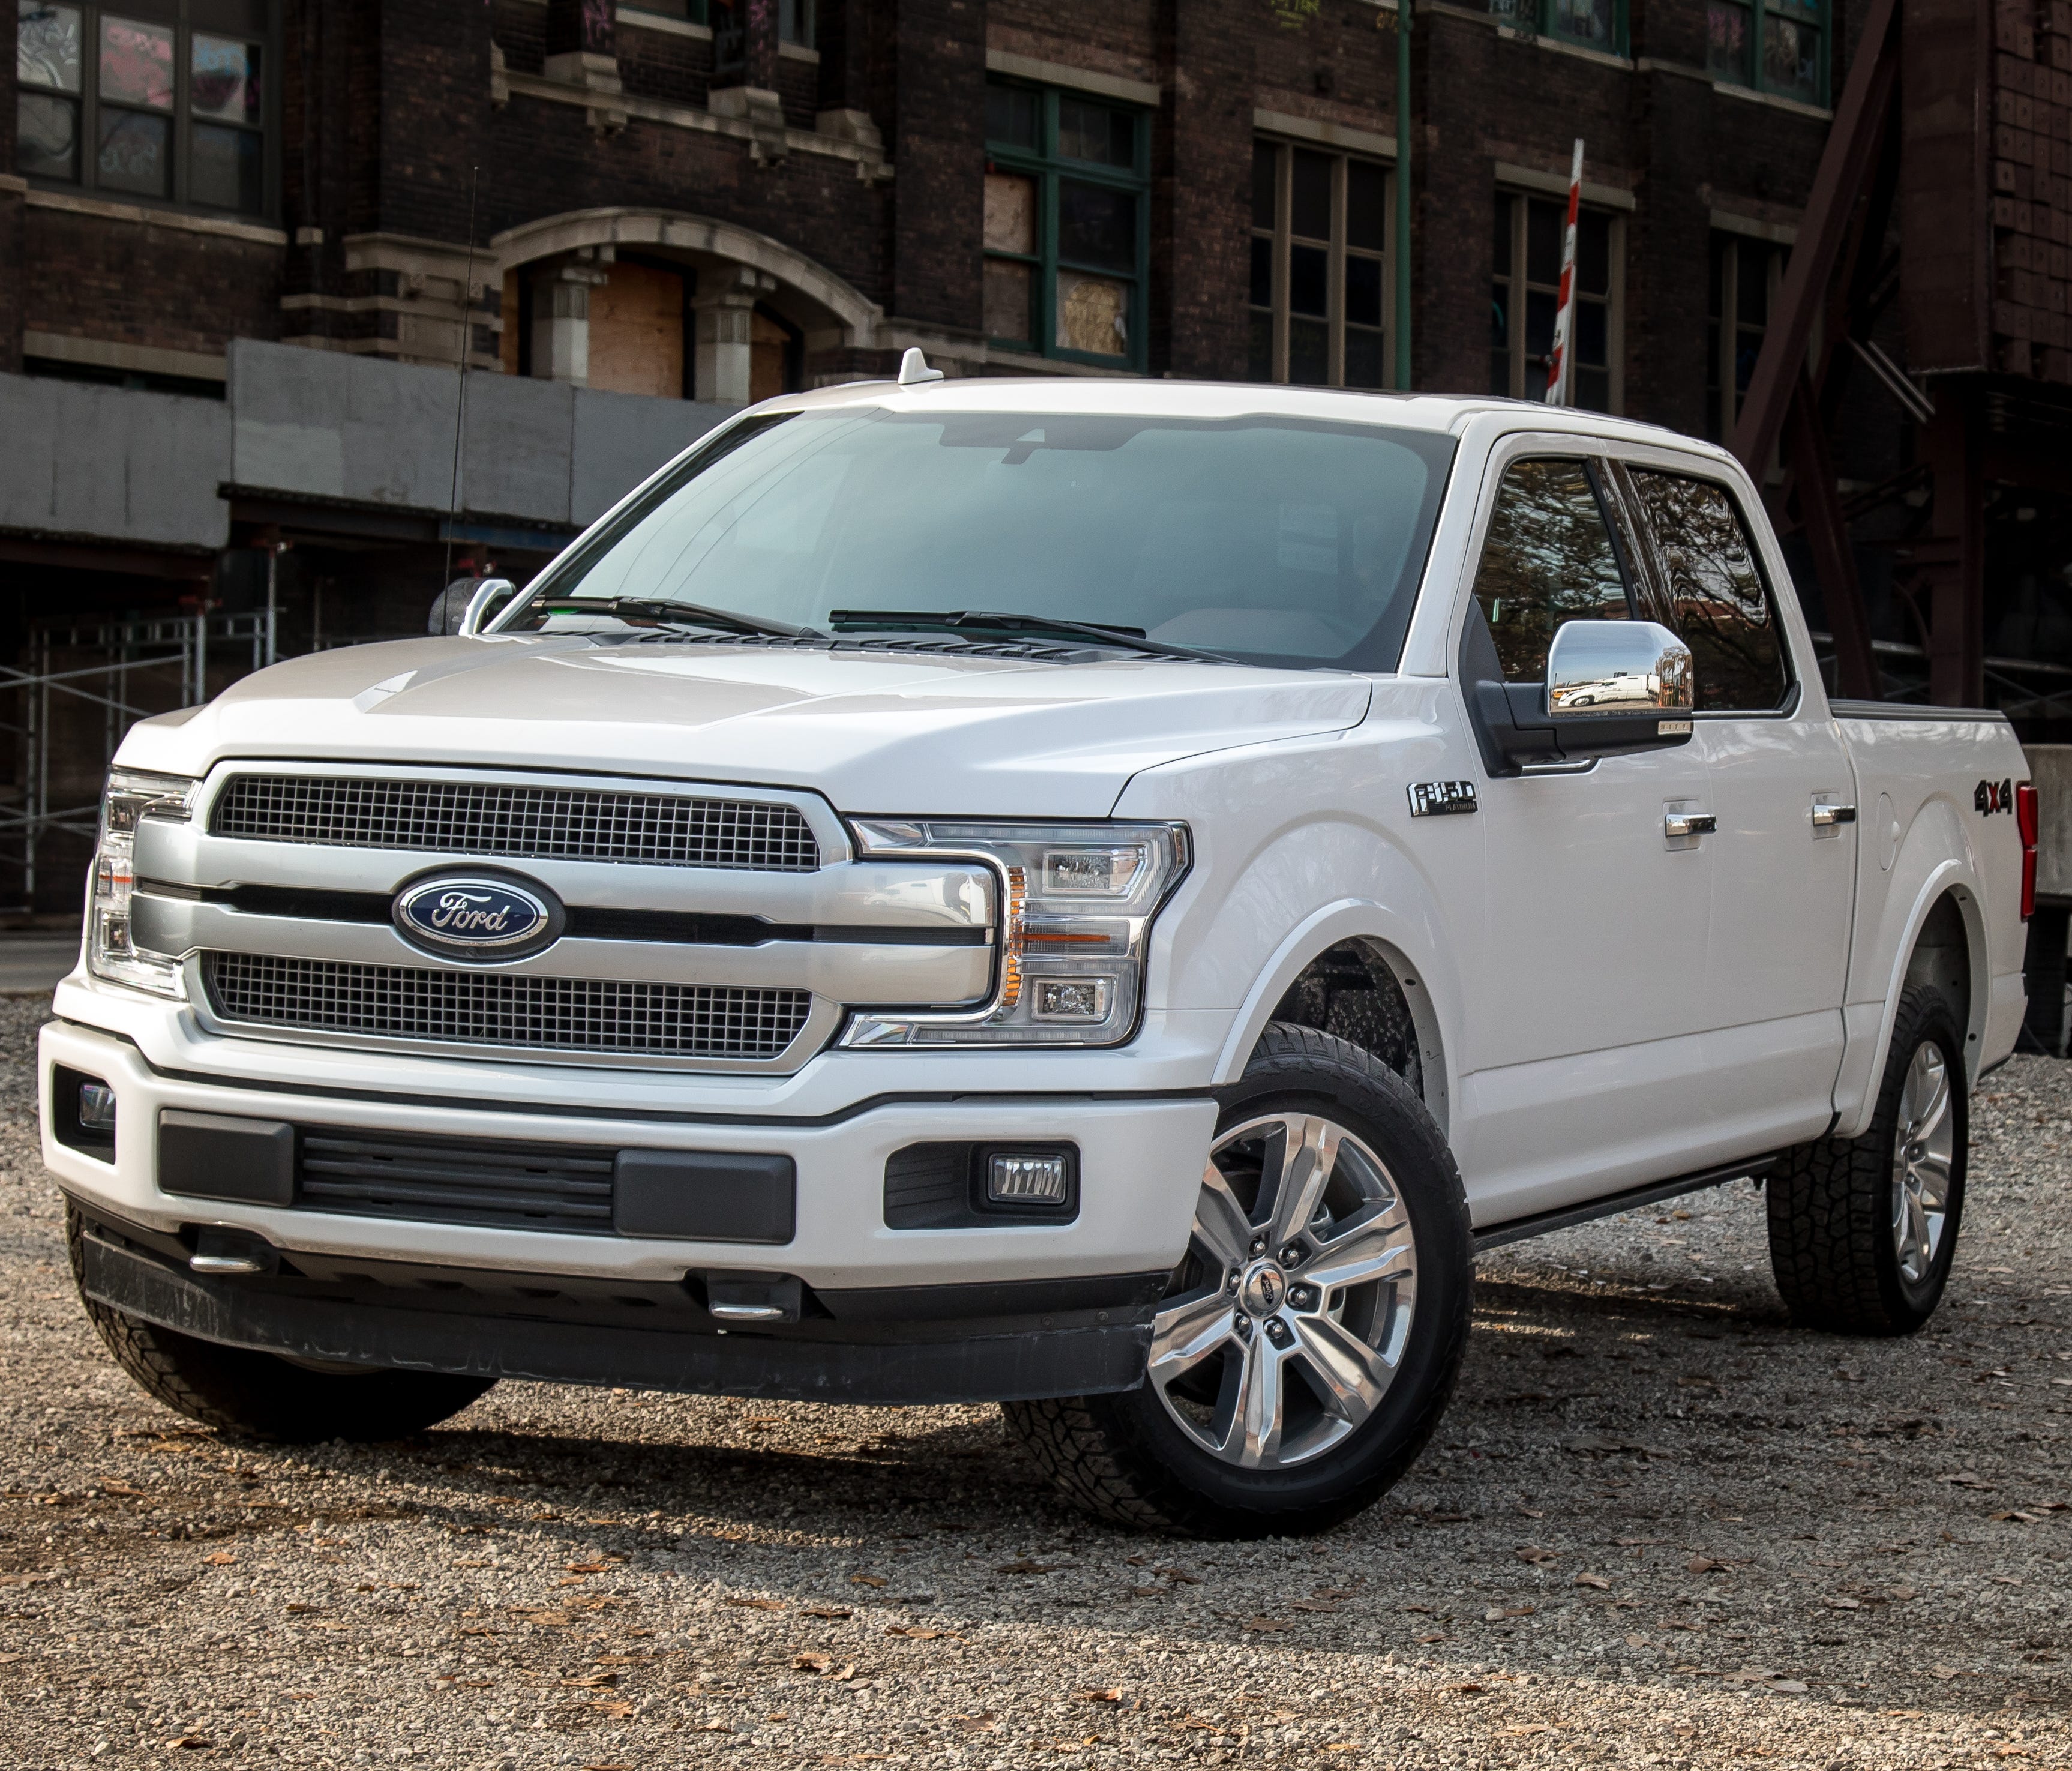 For 2018, the F-150 Platinum has a new V-8